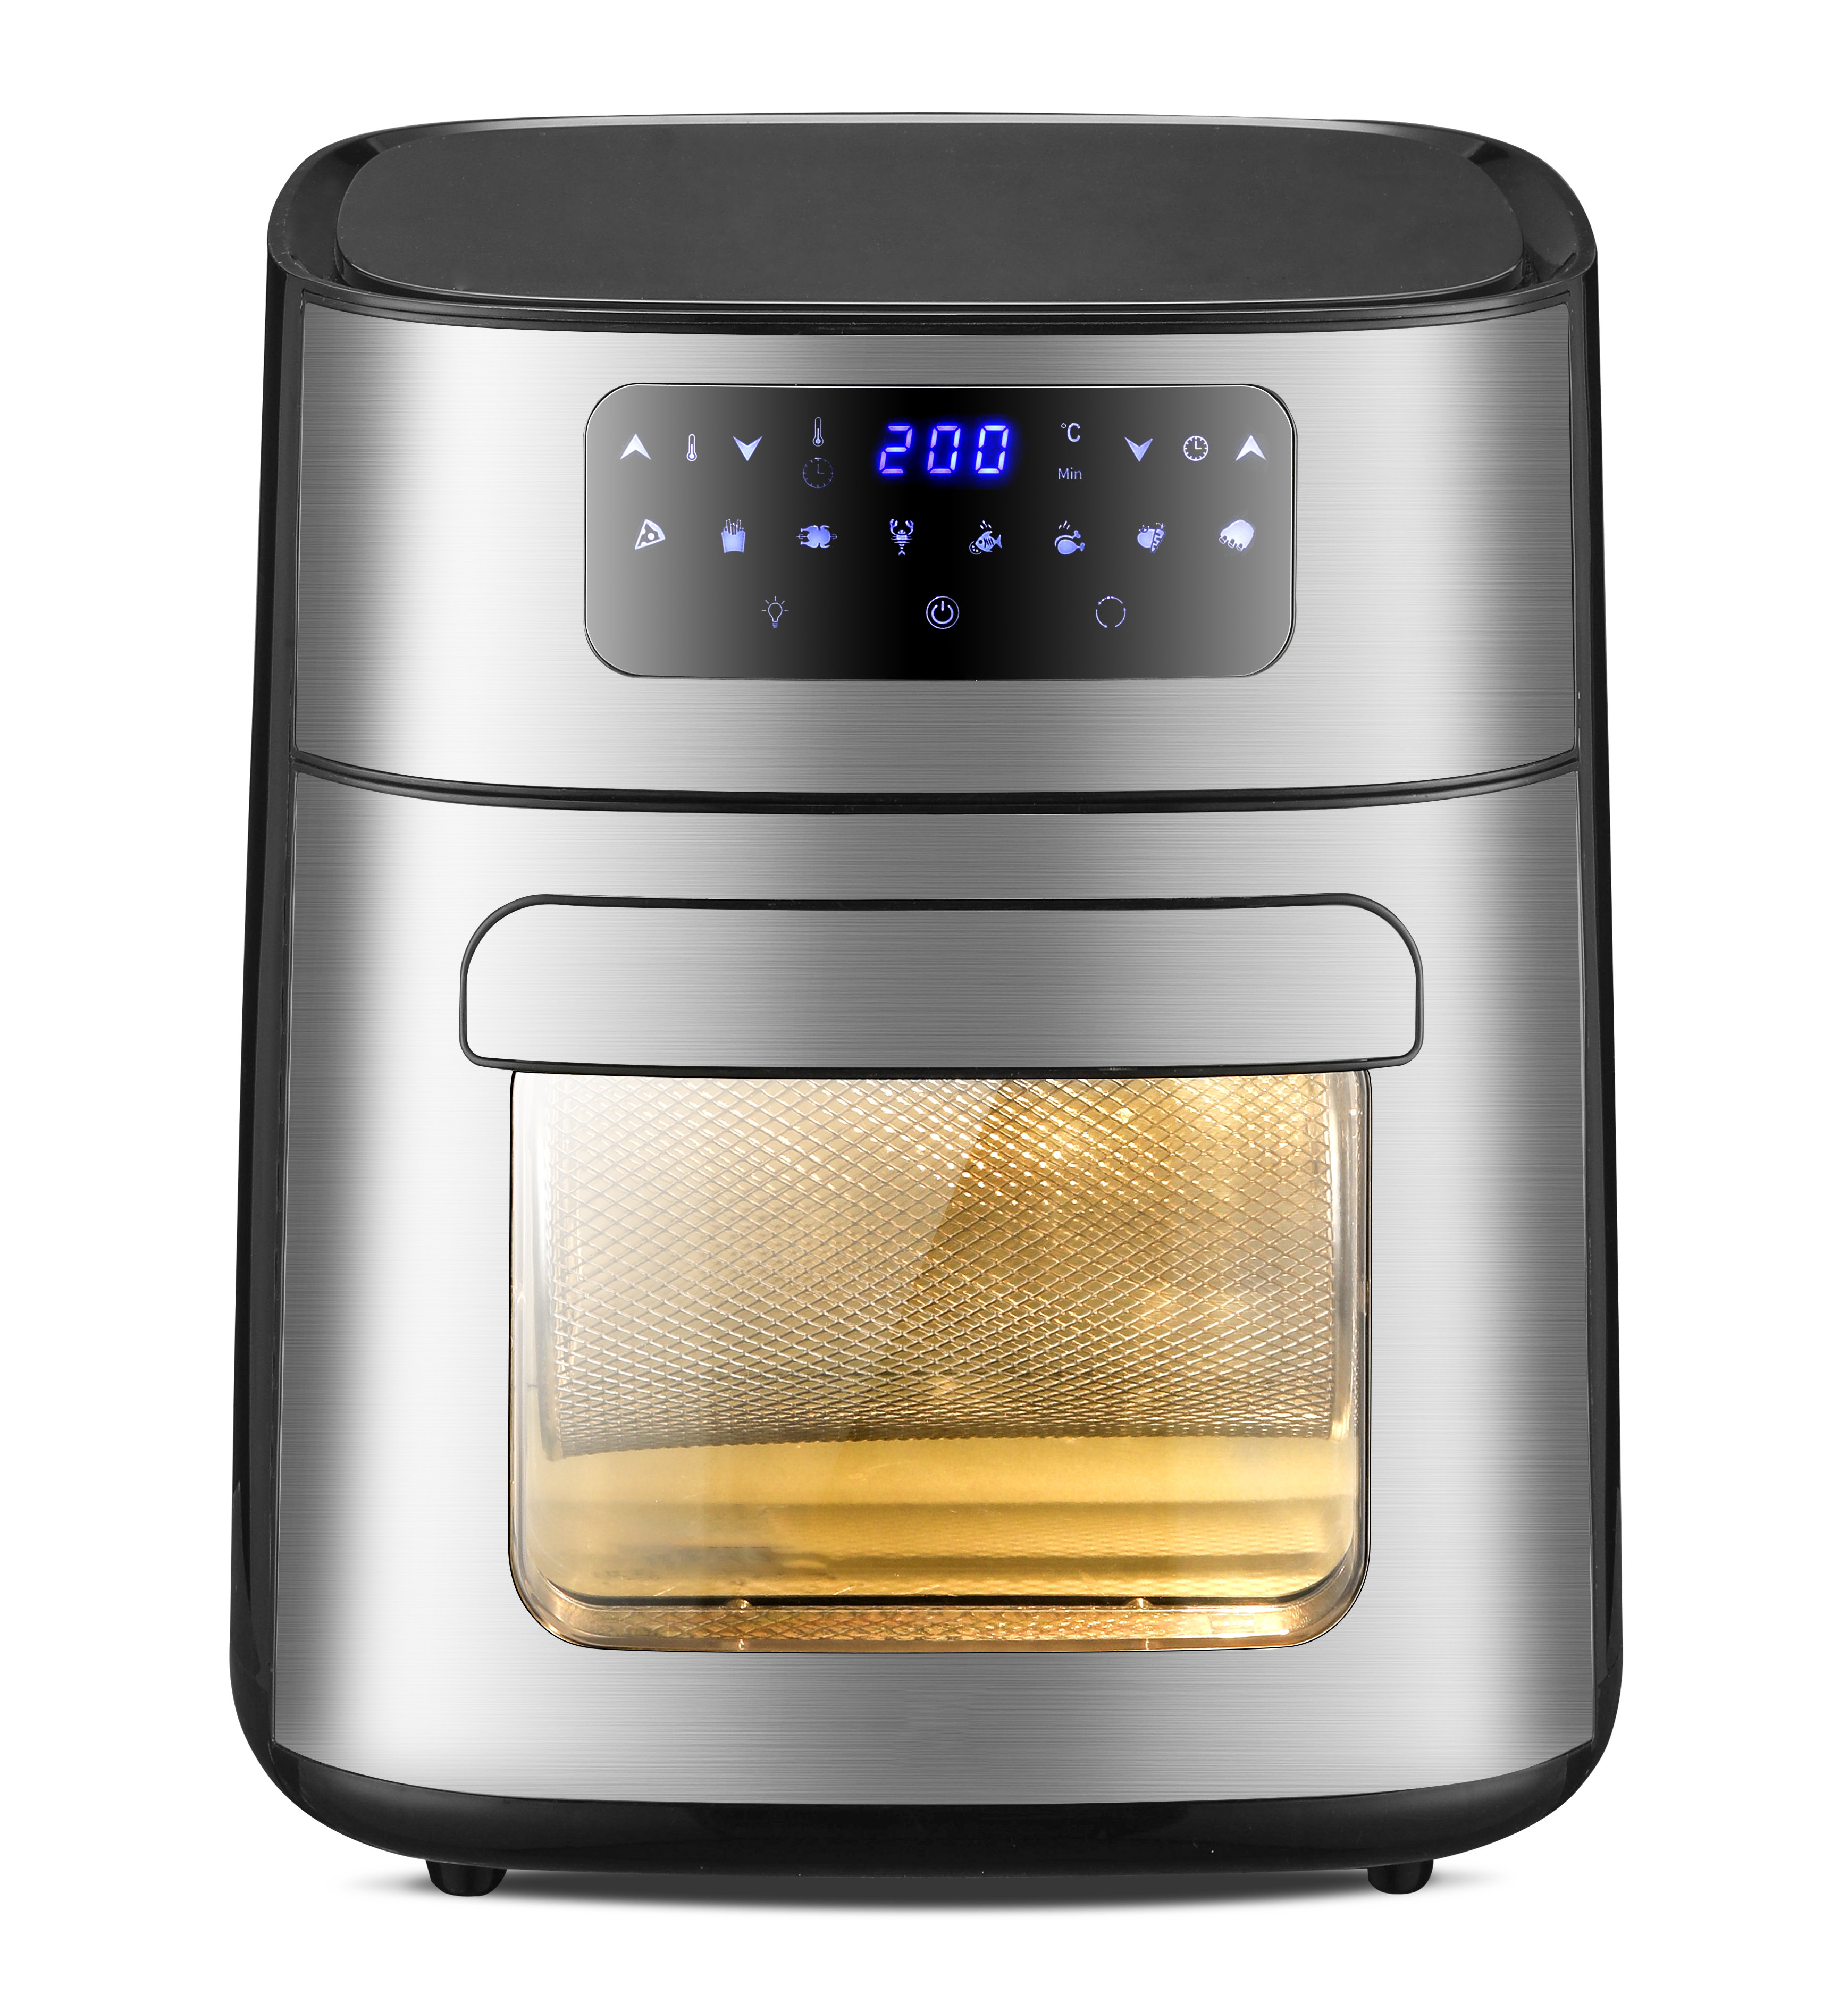 10L AIR FRYER OVEN WITH VISIBLE COOKING WINDOW